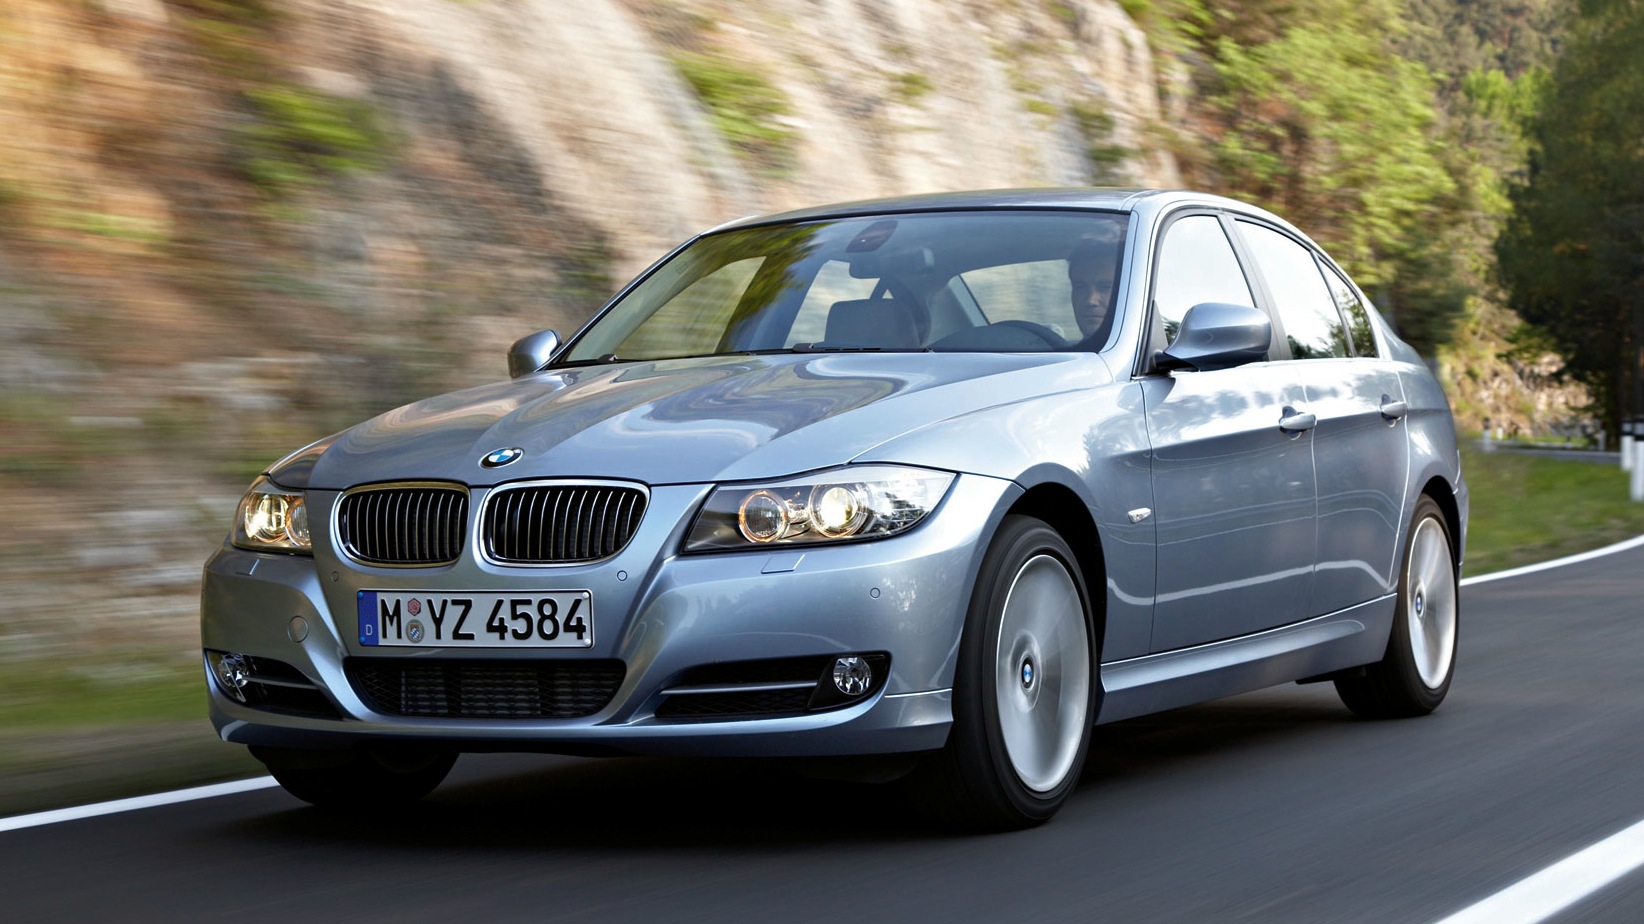 Own an E90 BMW 3Series from as low as RM1,888 with Auto